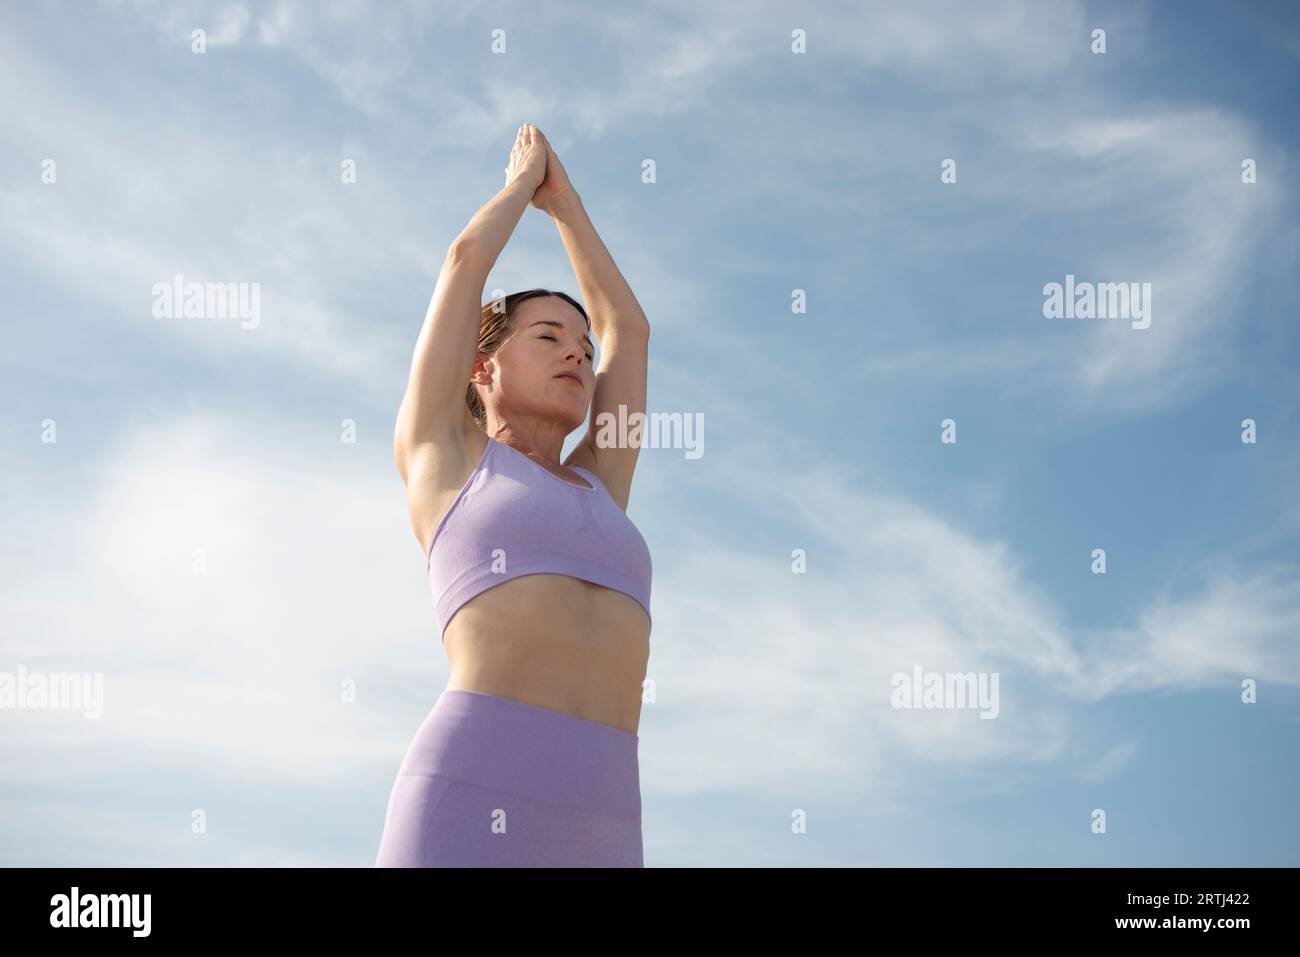 fit, sporty woman engaging in a standing yoga pose with her hands touching above her head. Stock Photo